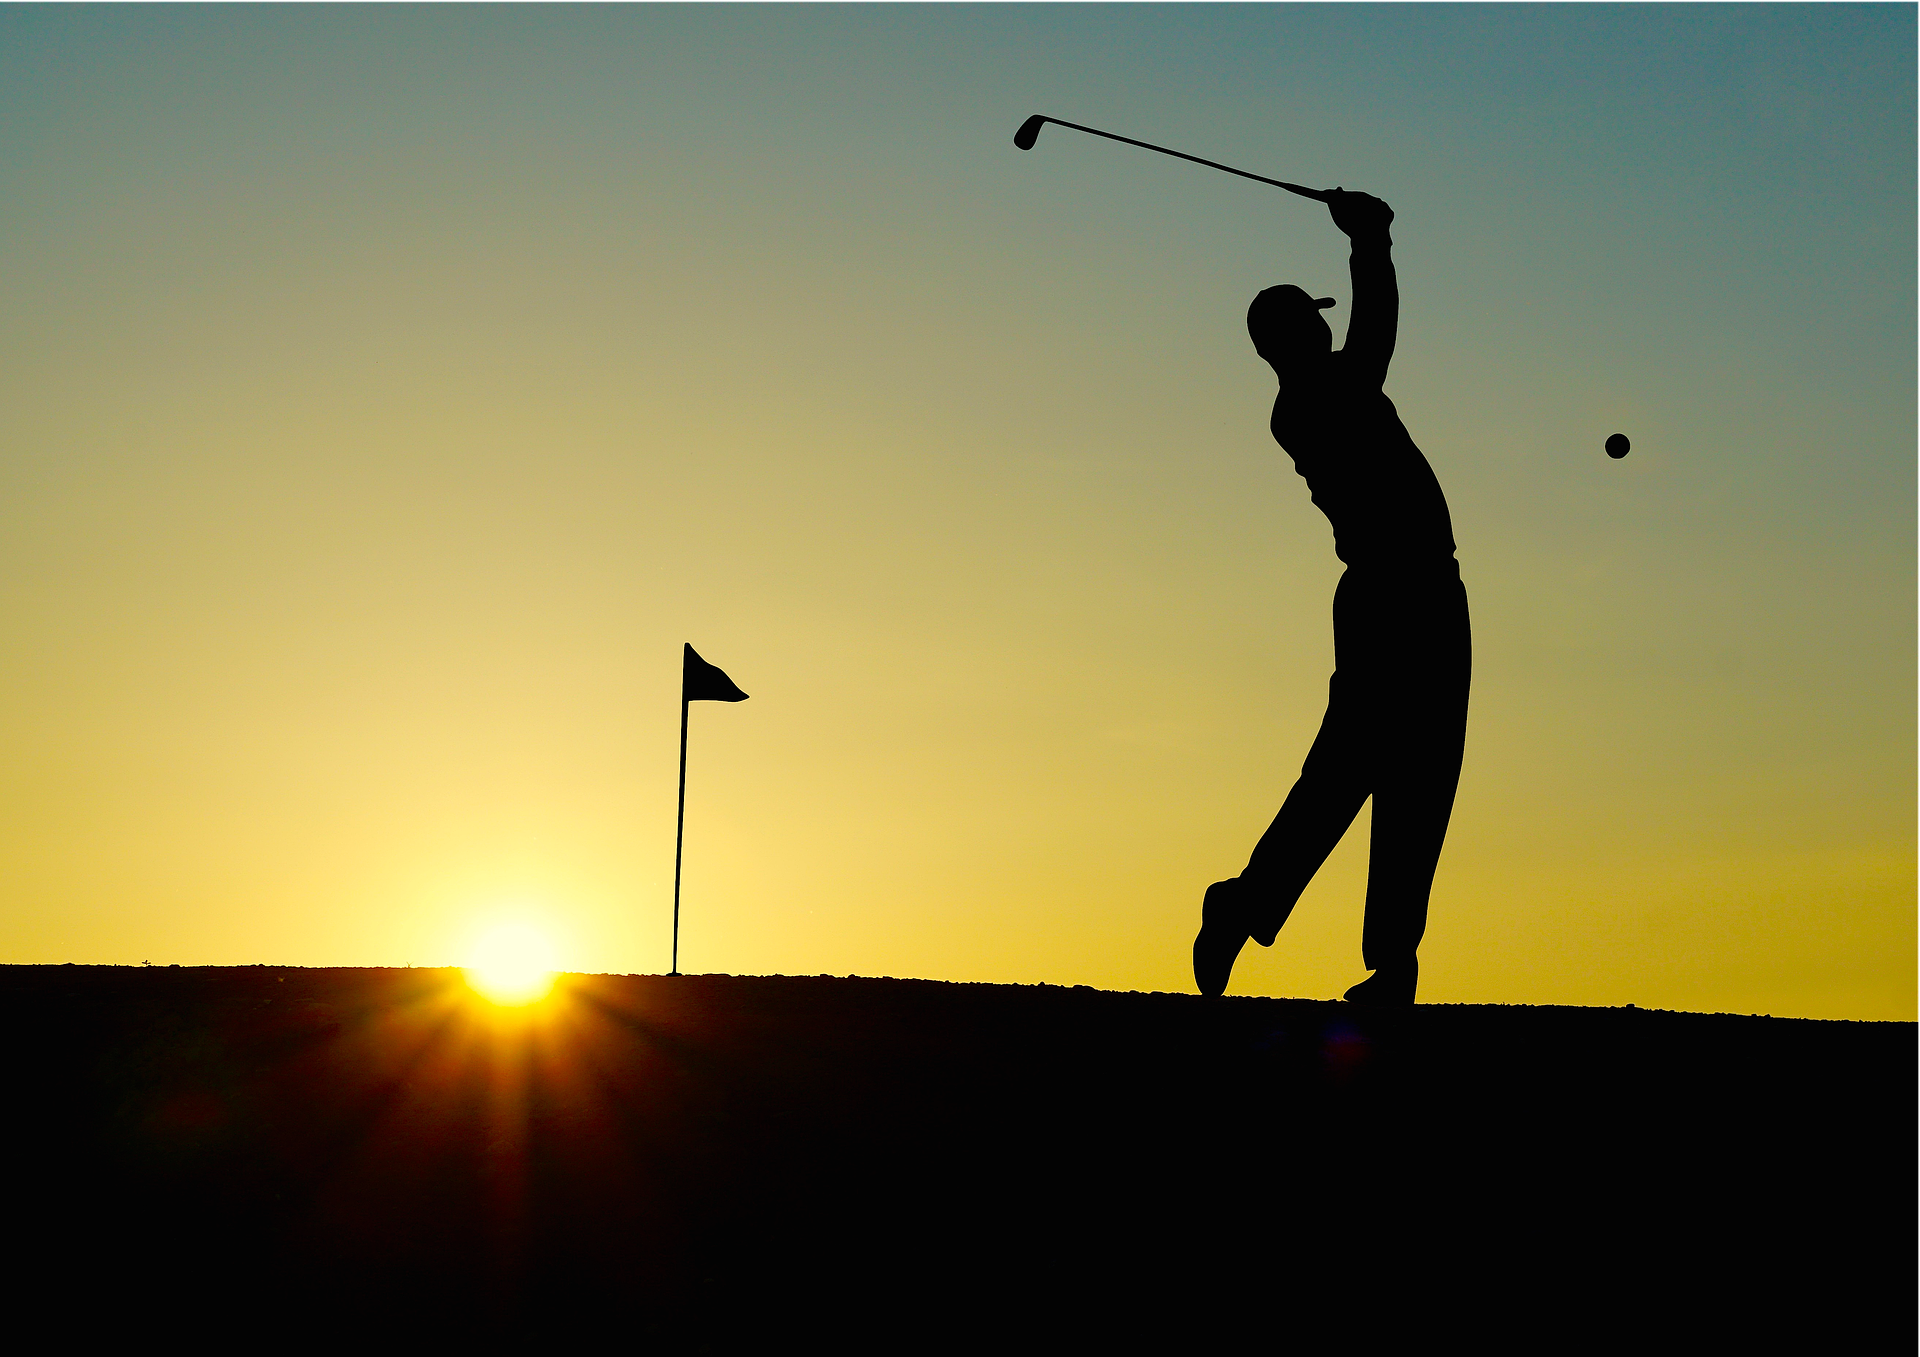 How to Get Better at Golf Without Lessons